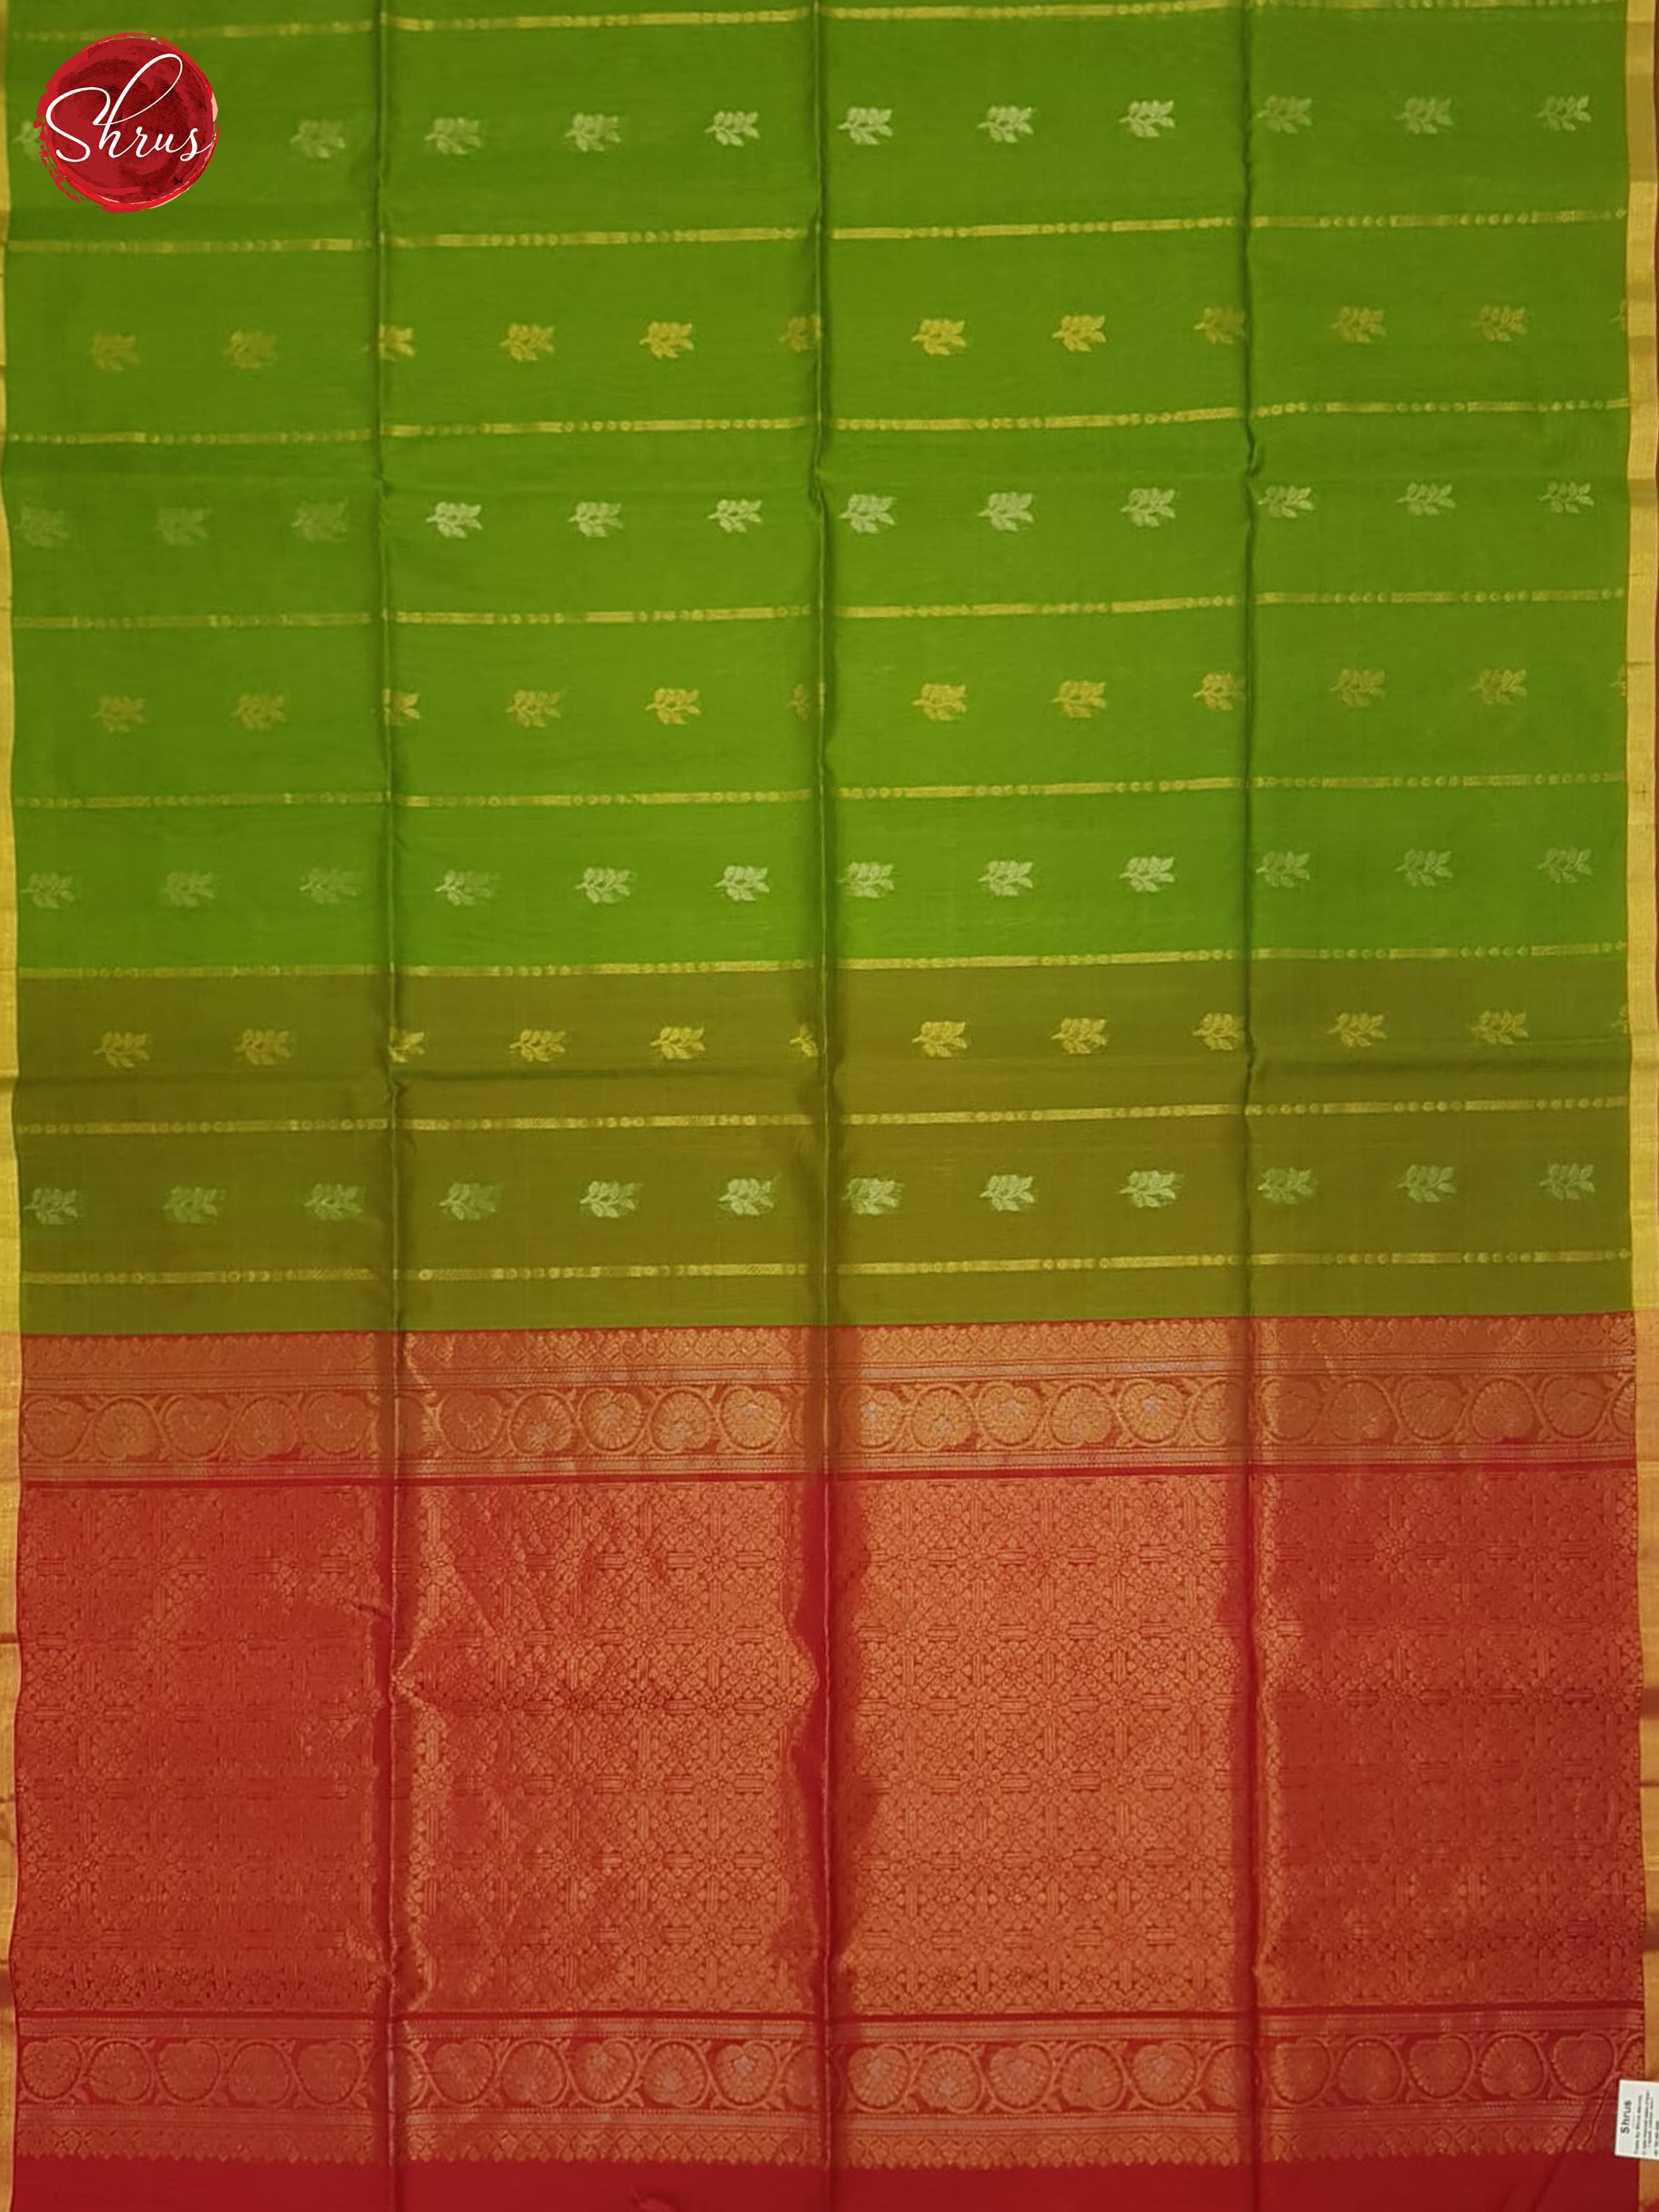 Green And Red- Silk Cotton Saree - Shop on ShrusEternity.com